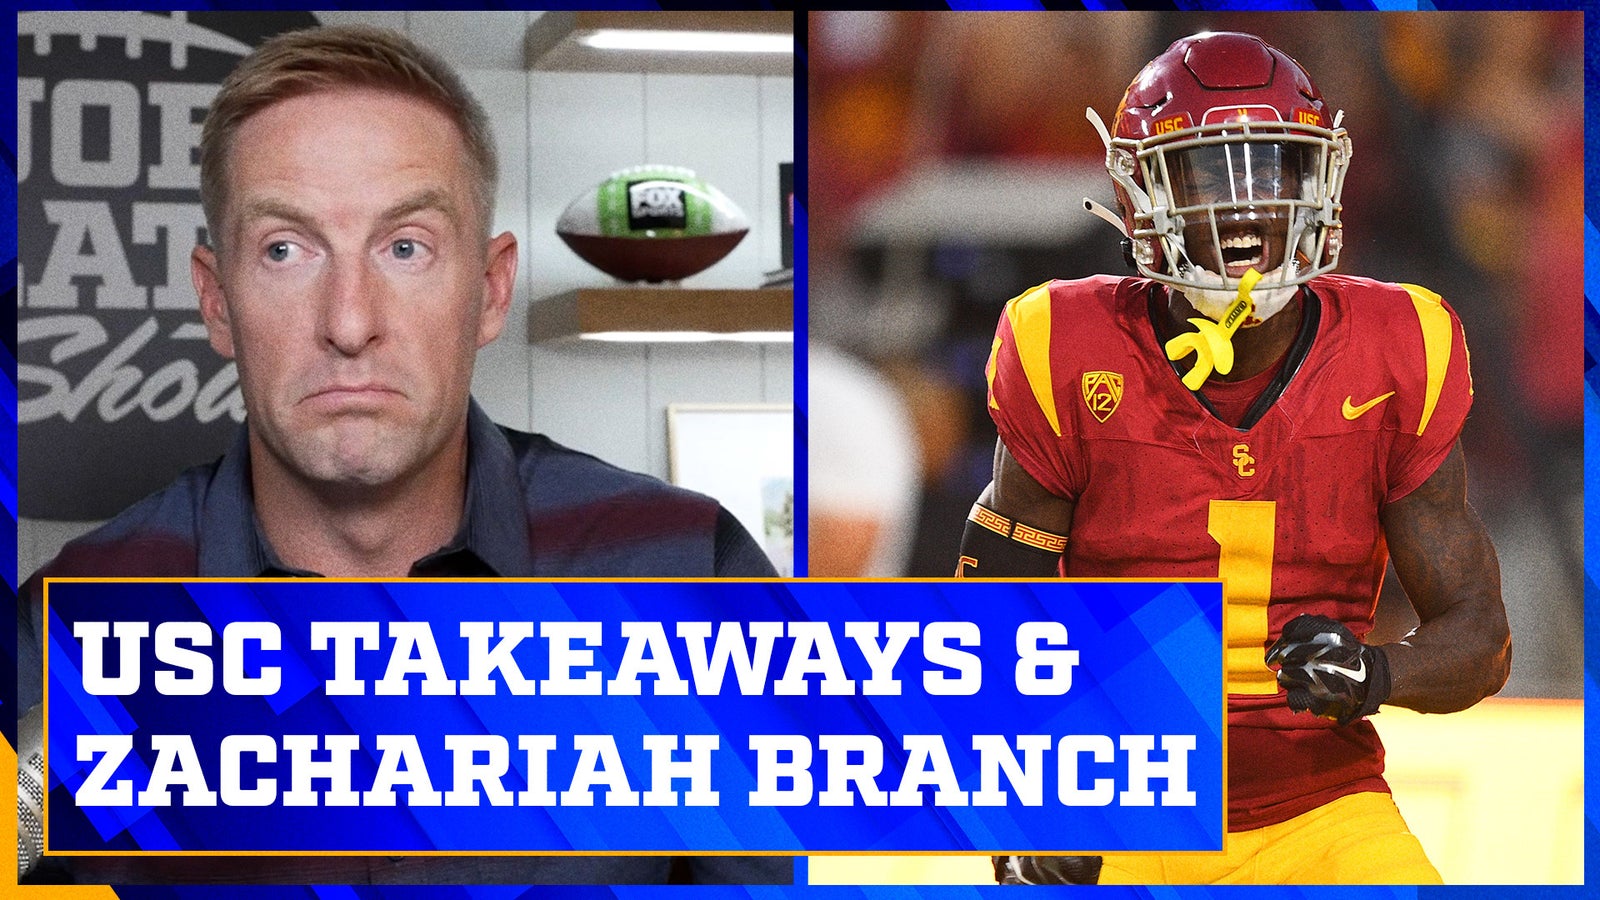 USC Trojans' WR Zachariah Branch shines in win over San Jose State